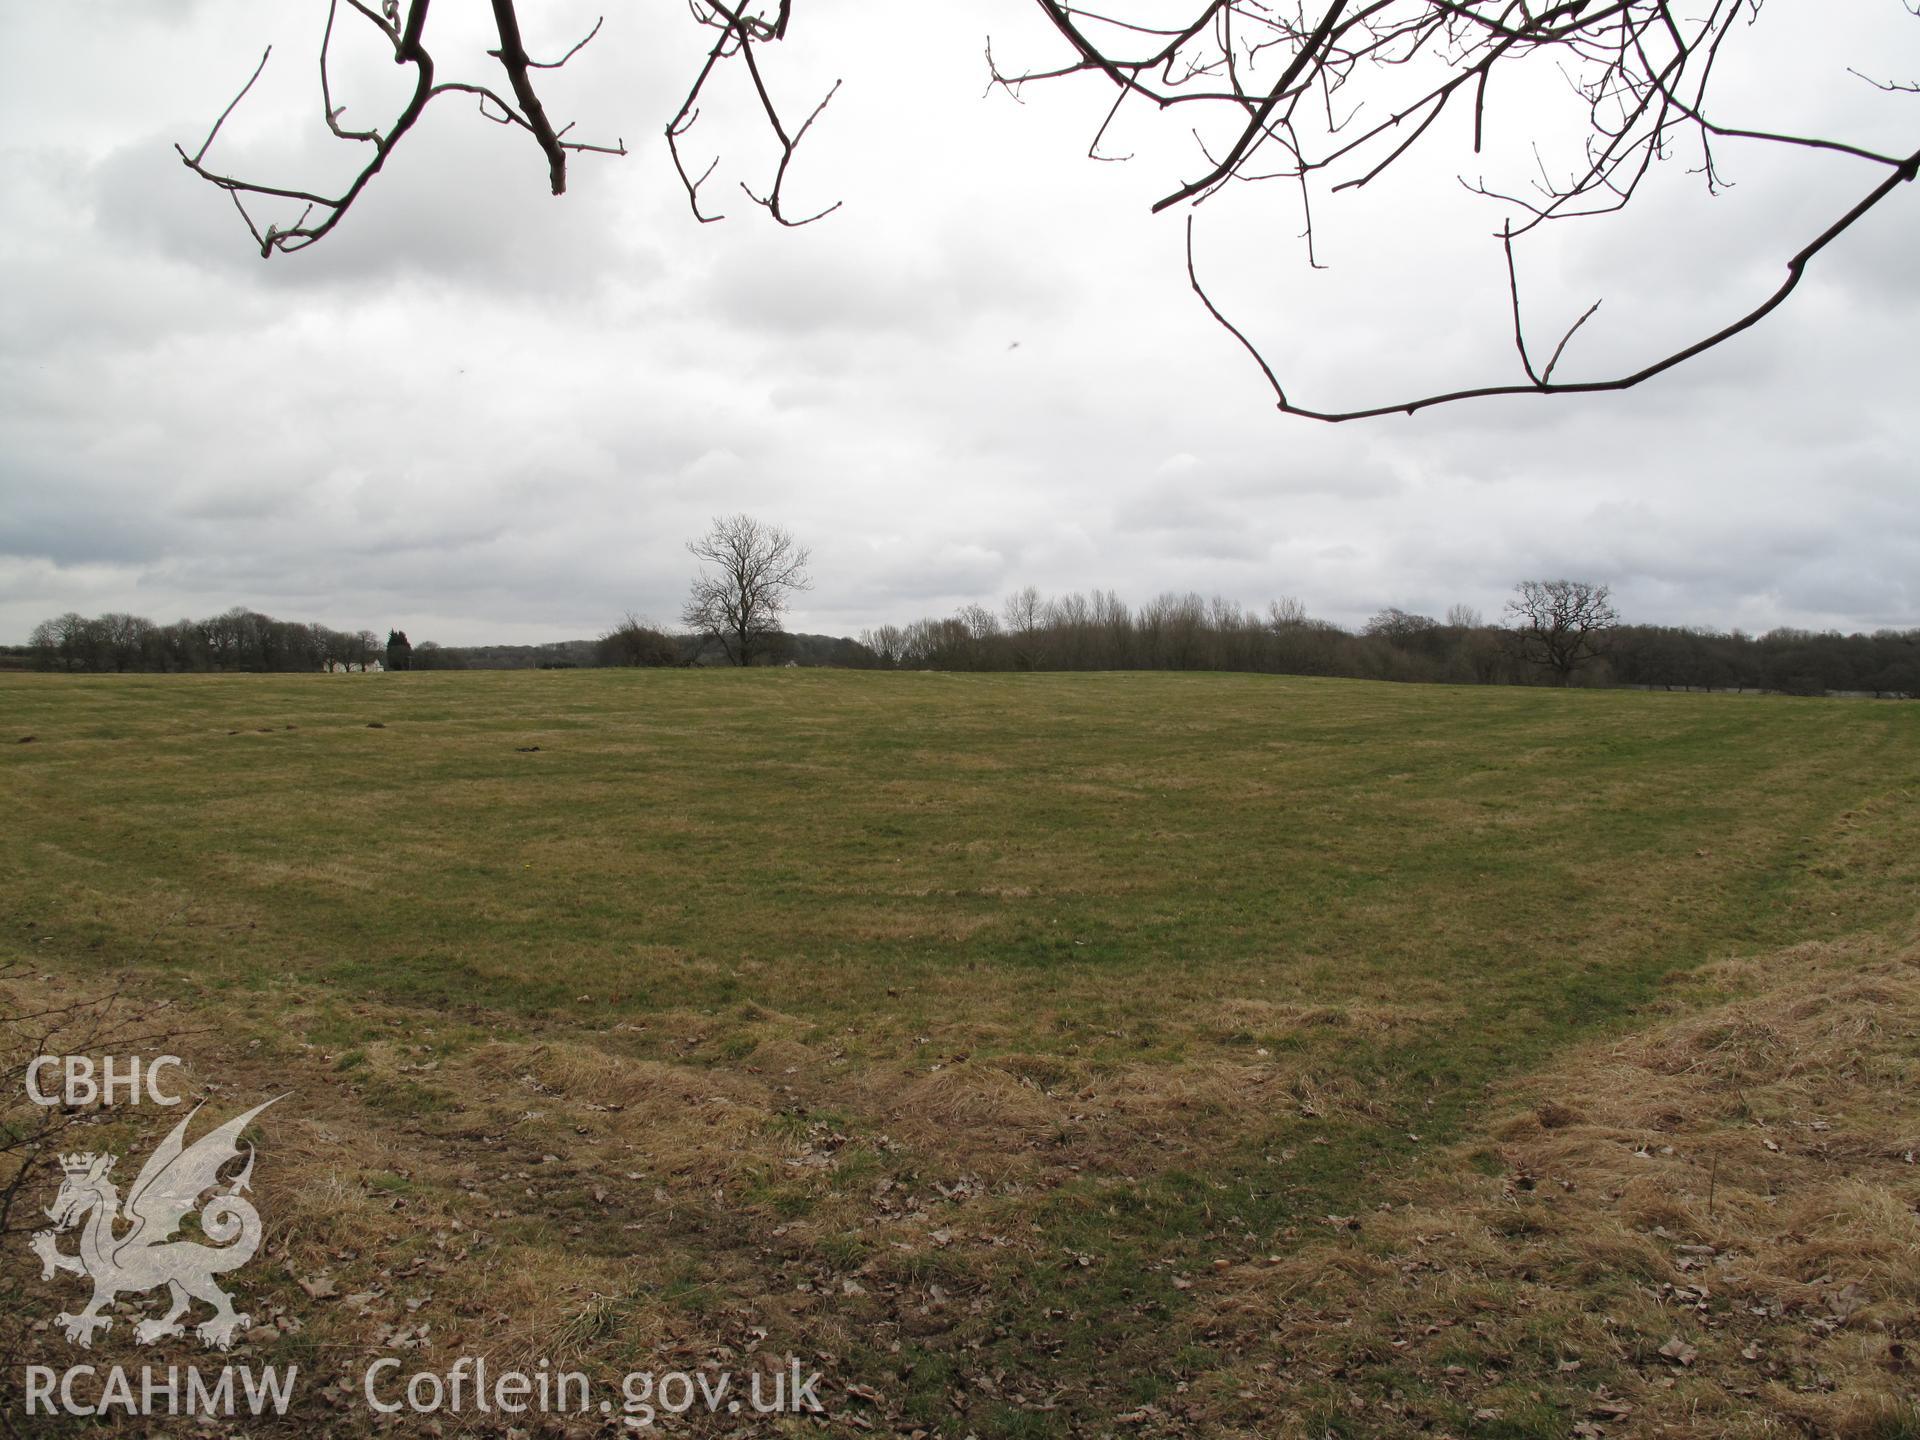 View of St Fagans battle site near Tregochas from the northwest taken by Brian Malaws on 27 February 2009.